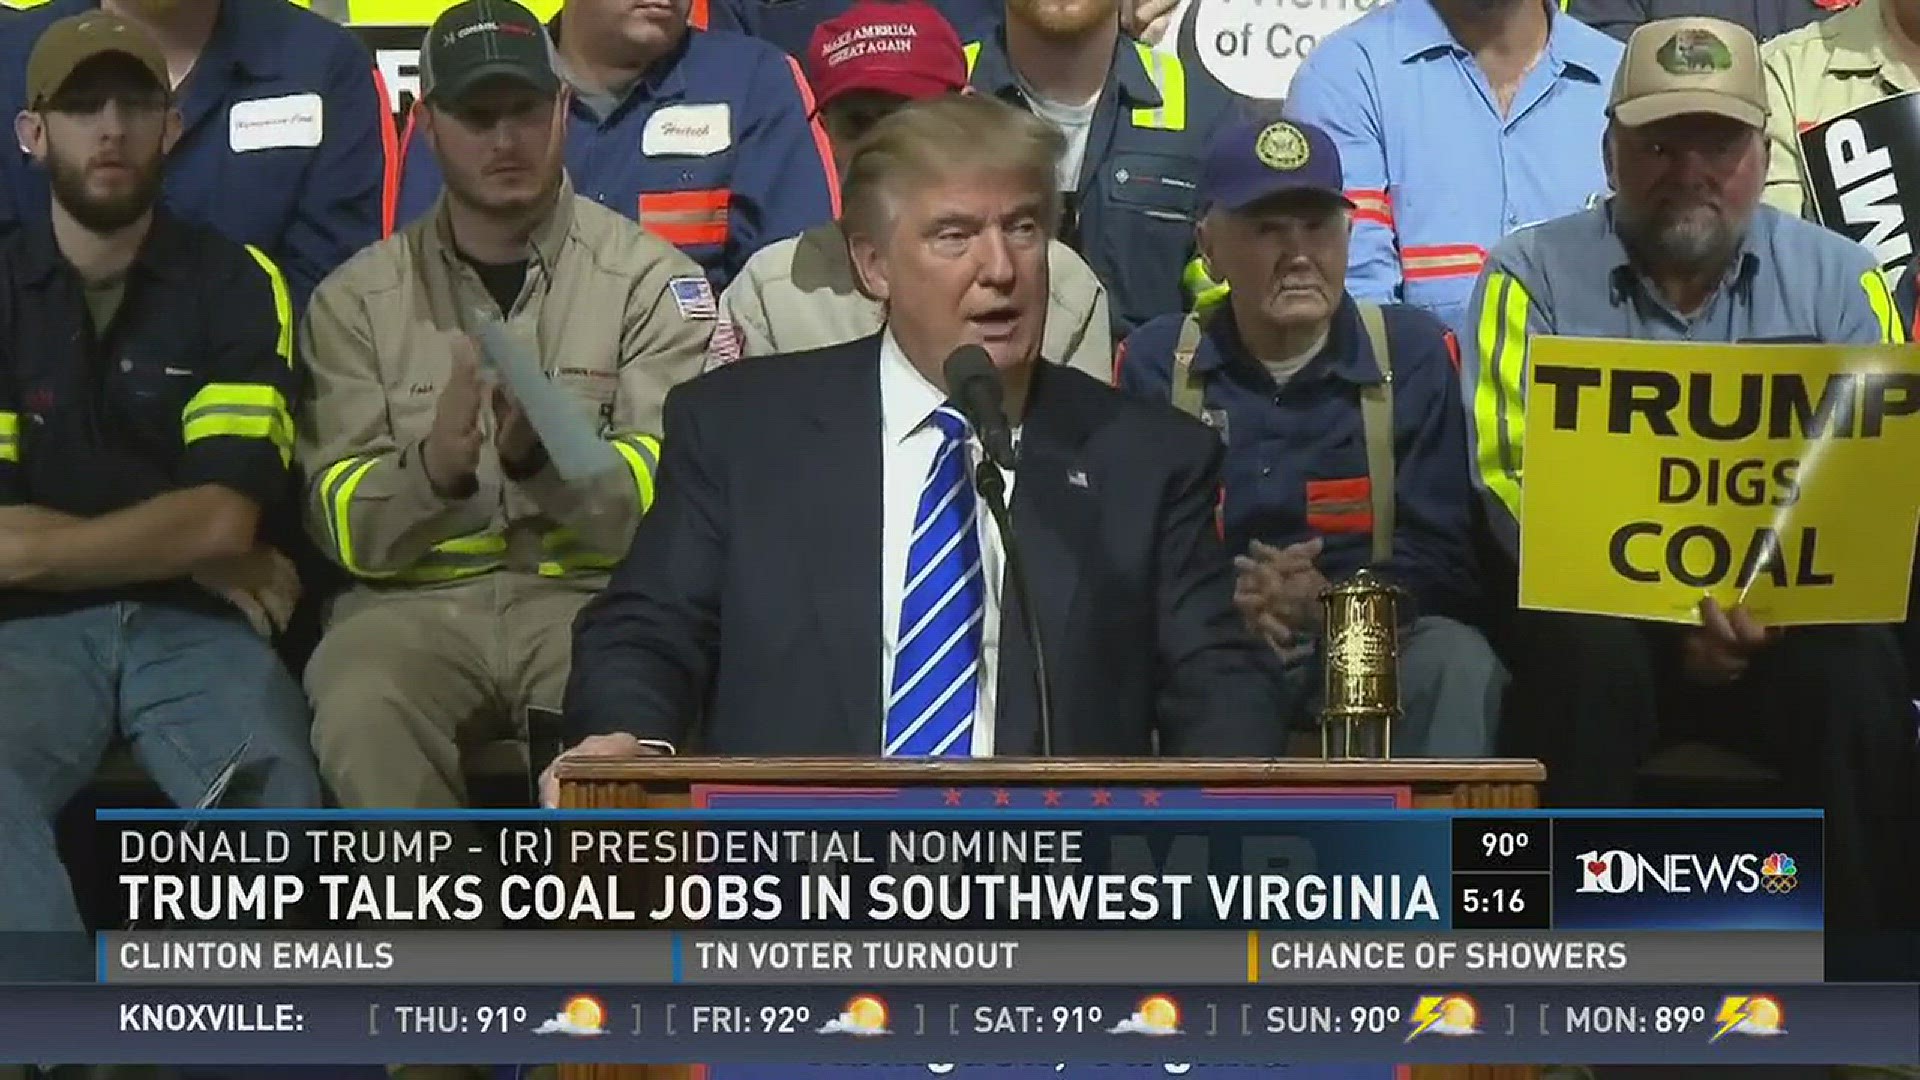 Donald Trump spoke to a crowd in Abingdon, Virginia on Wednesday about keeping jobs in coal country. August 10, 2016.